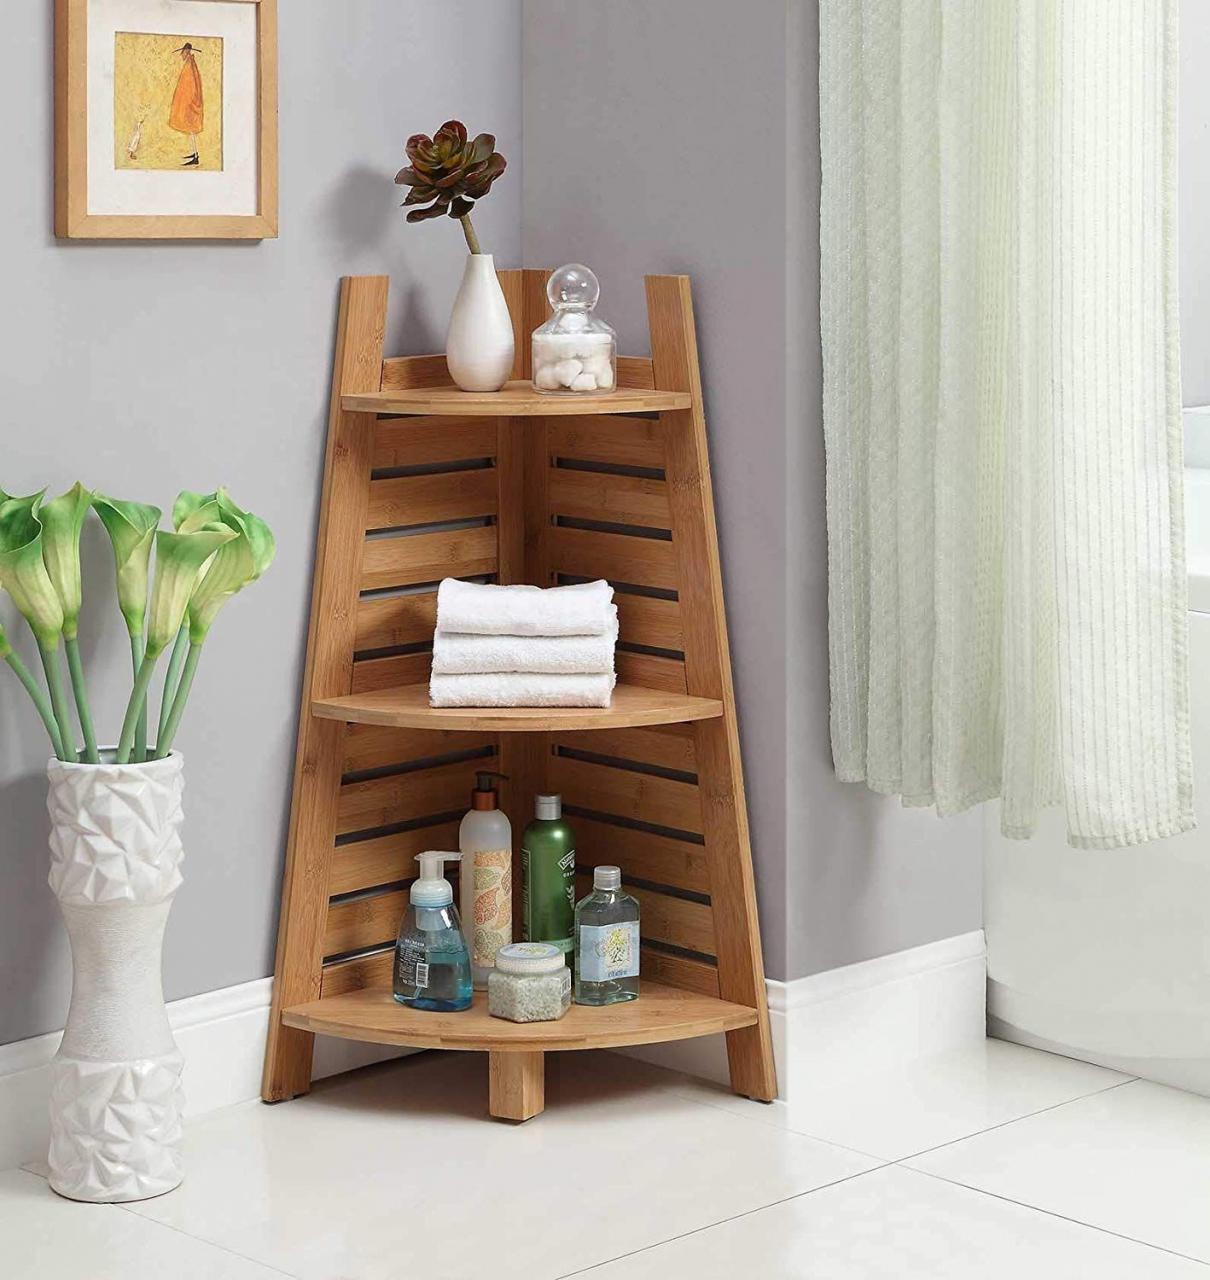 The Best Bathroom Corner Shelf Decor Most Searched for 2021 Anti Skid